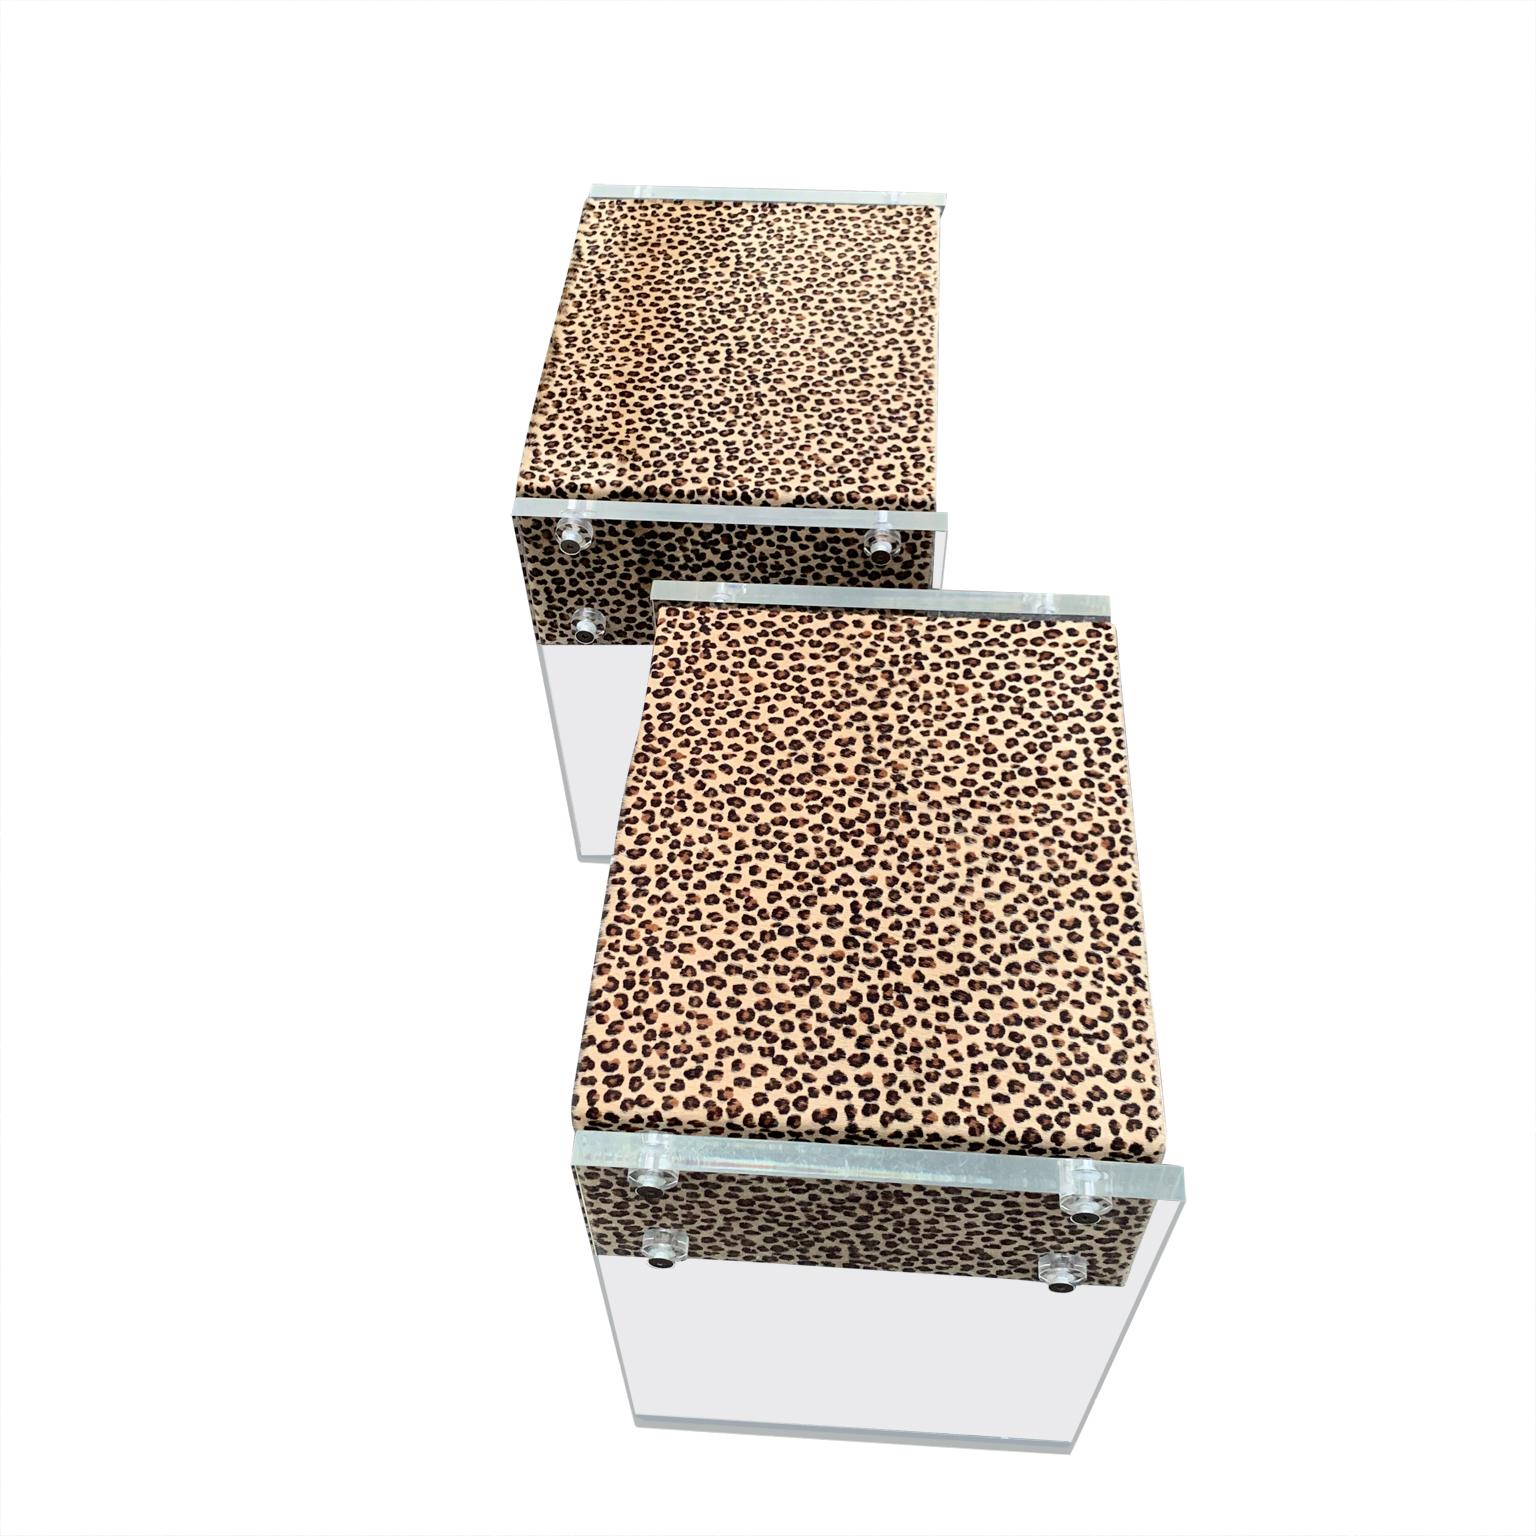 Hand-Crafted Pair of Faux Cheetah Skin Upholstered Nightstands with Lucite Side Panels